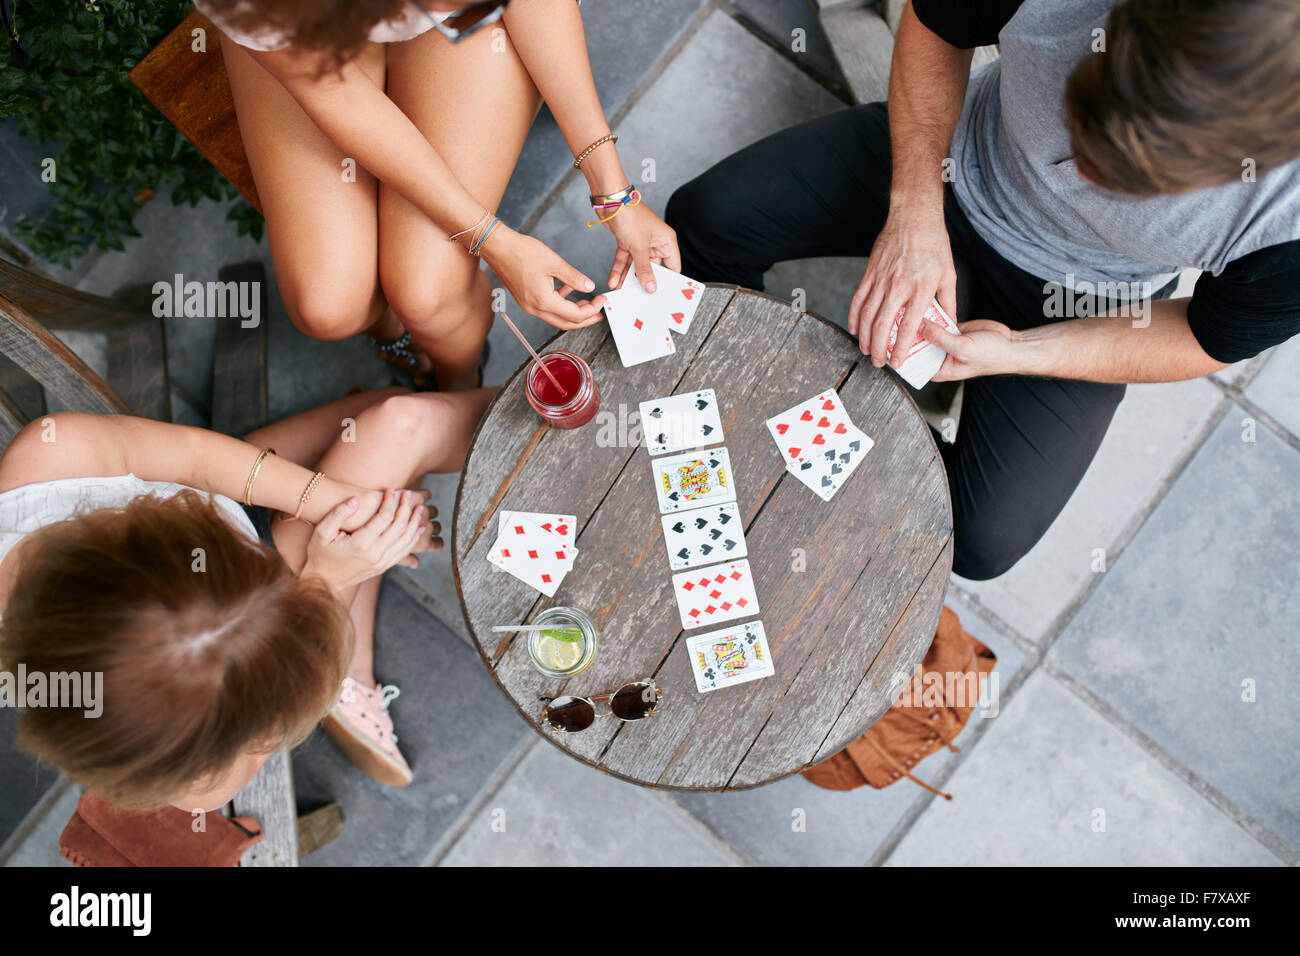 Top view of three young people playing cards at sidewalk cafe. Young people sitting around a coffee table and playing card game. Stock Photo